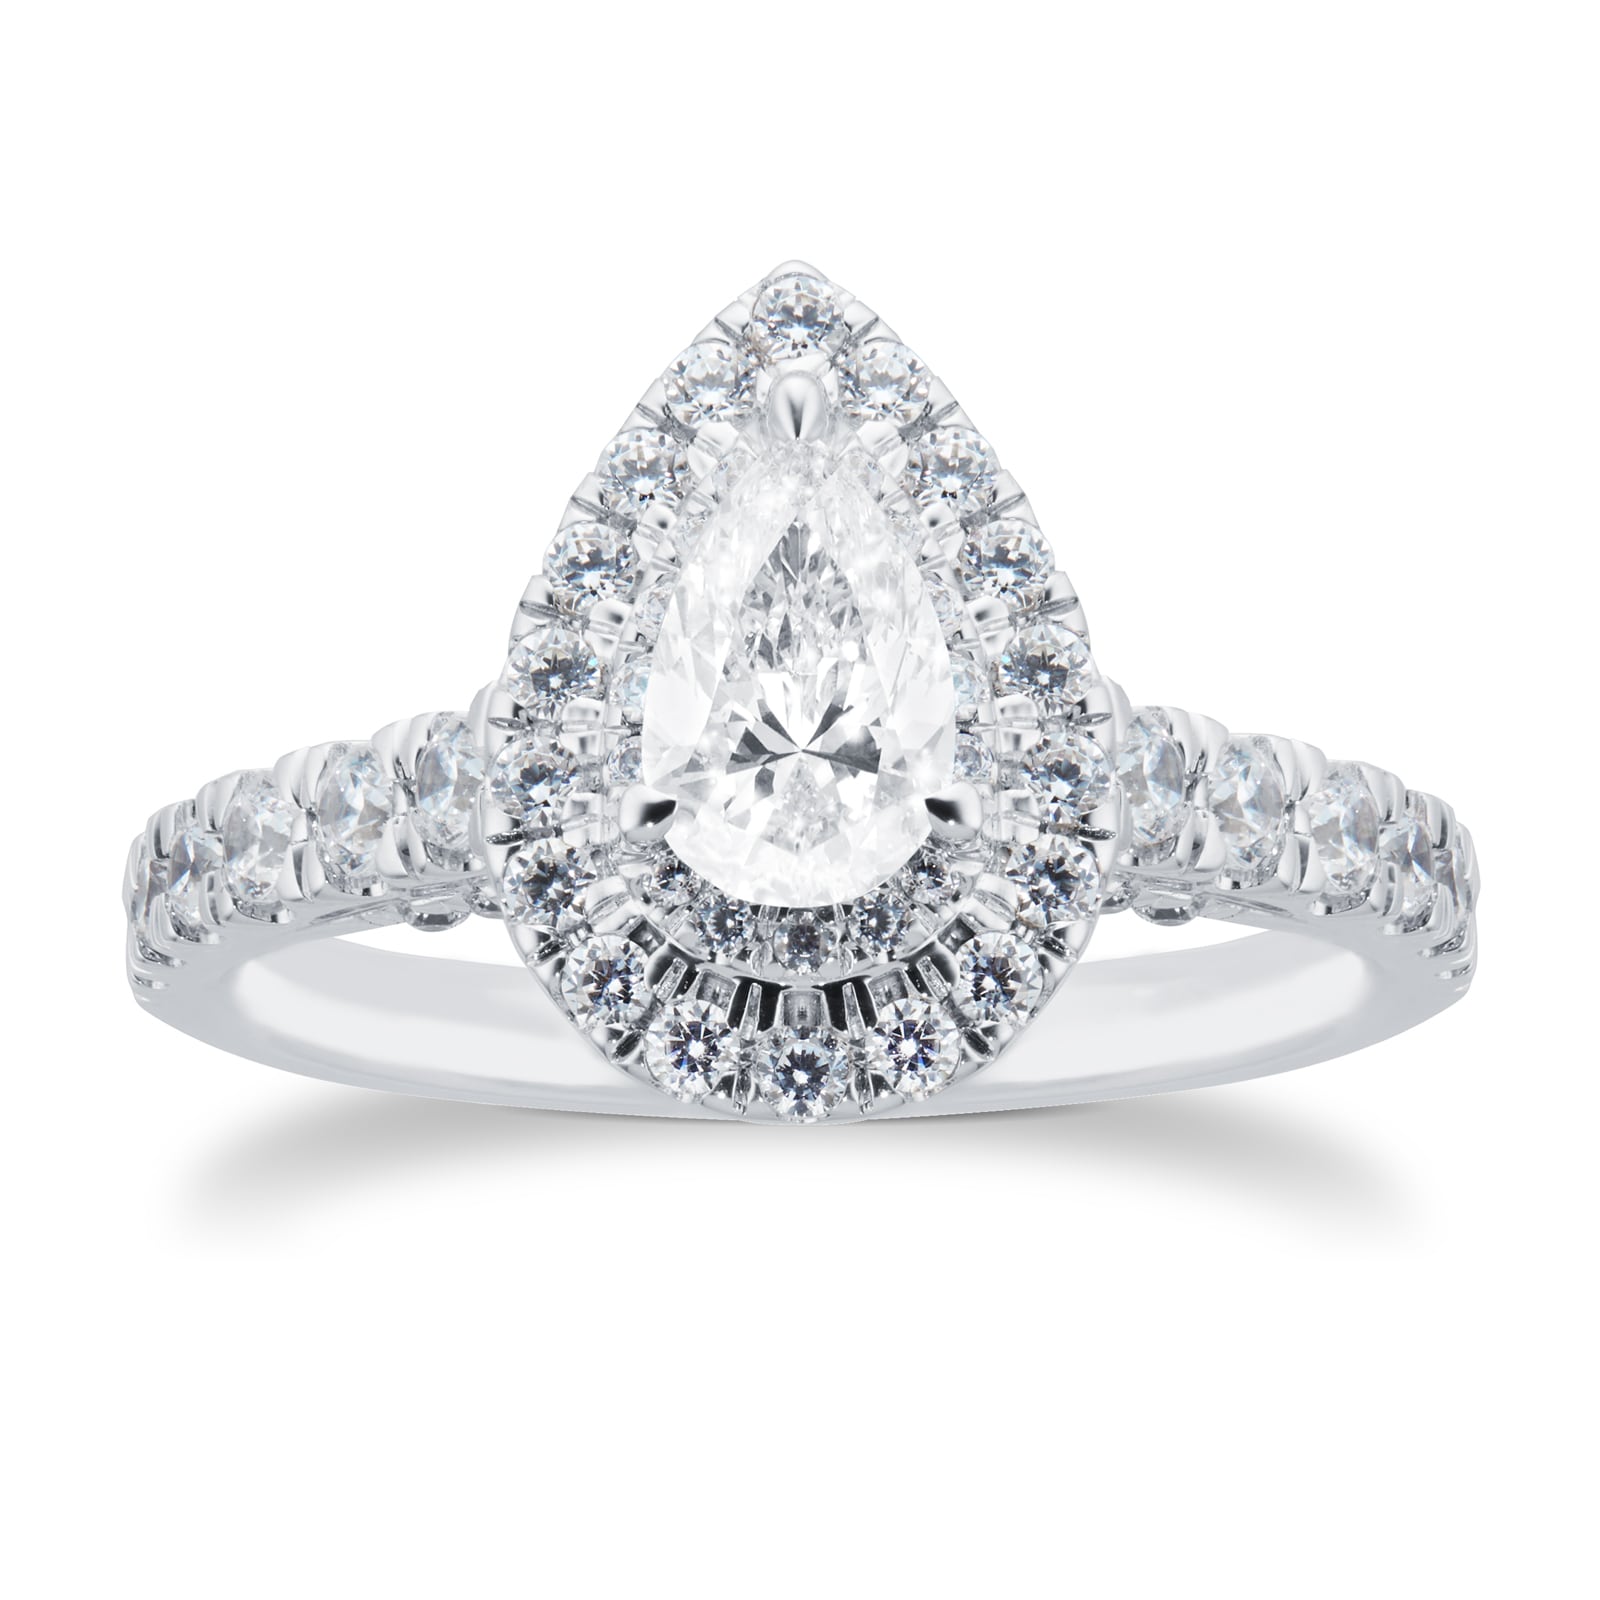 18ct White Gold 1.25cttw Pear Halo Engagement Ring - Ring Size P